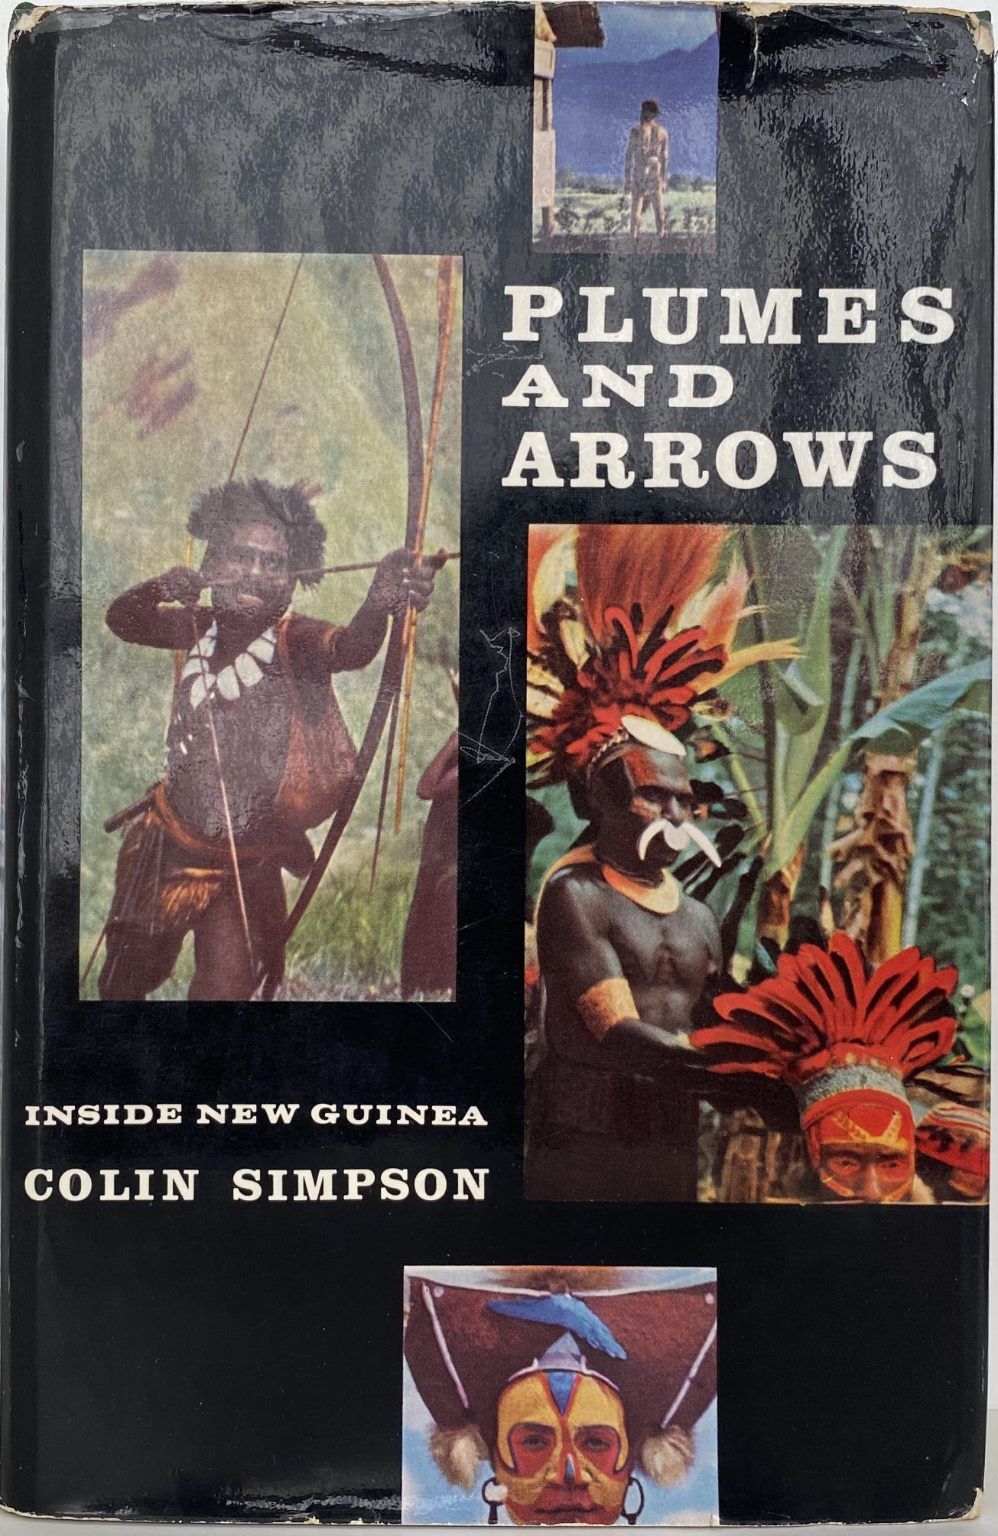 PLUMES AND ARROWS: Inside New Guinea